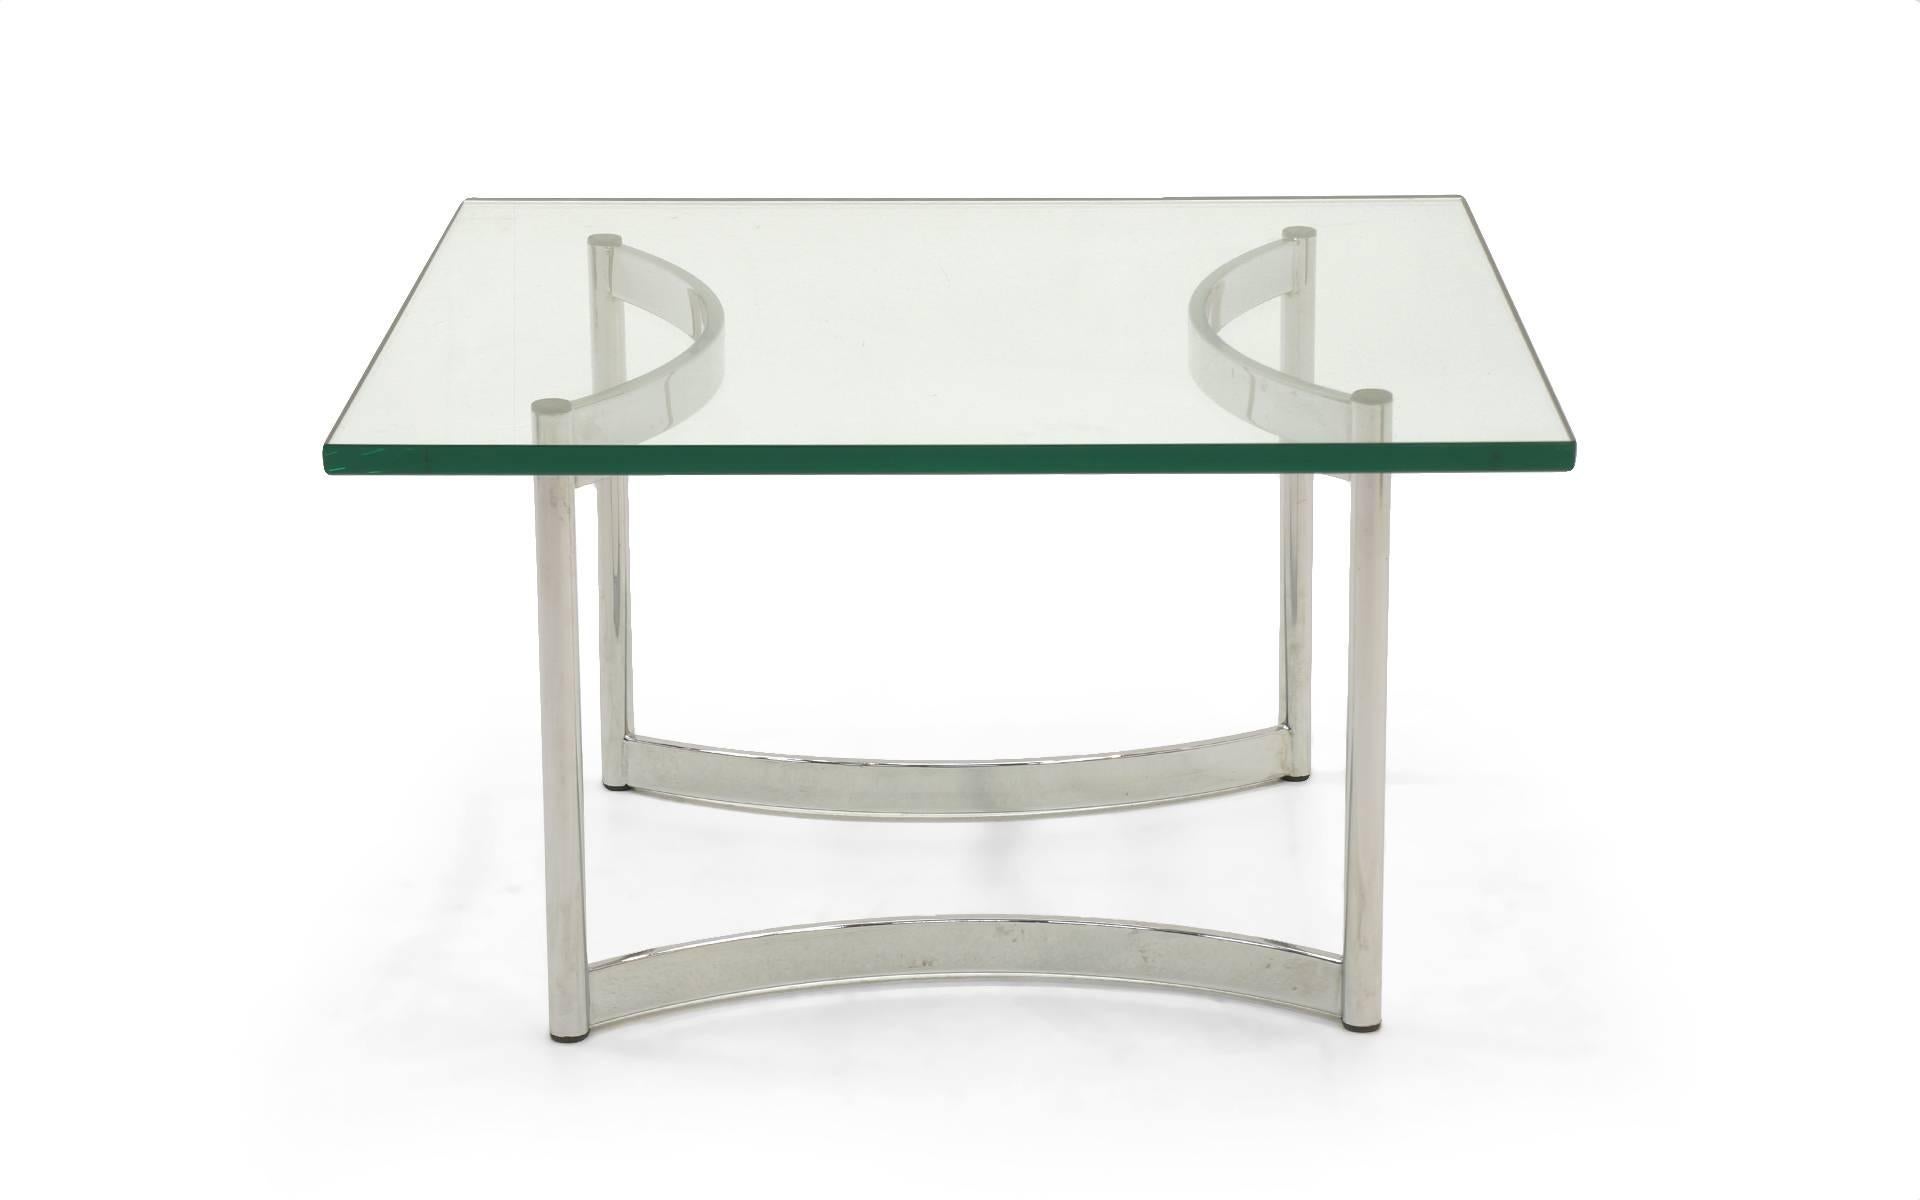 36 inch square glass and chrome coffee table. High quality 1/2 inch glass and chromed steel frame. Possibly designed by Milo Baughman or Laverne.